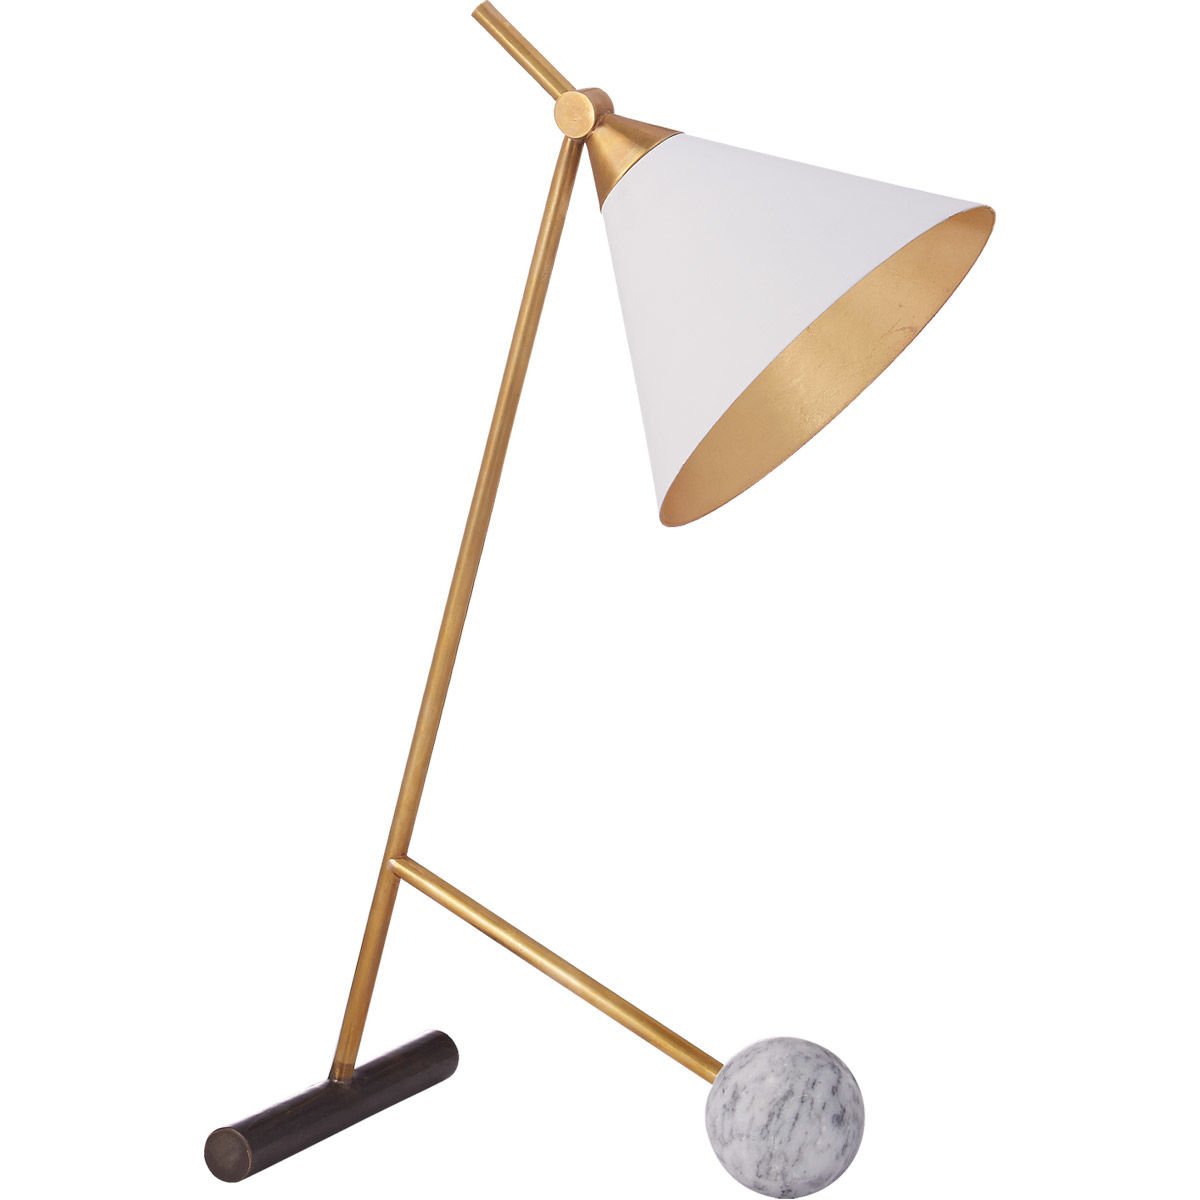 BRONZE AND ANTİQUE-BURNİSHED BRASS TABLE LAMP